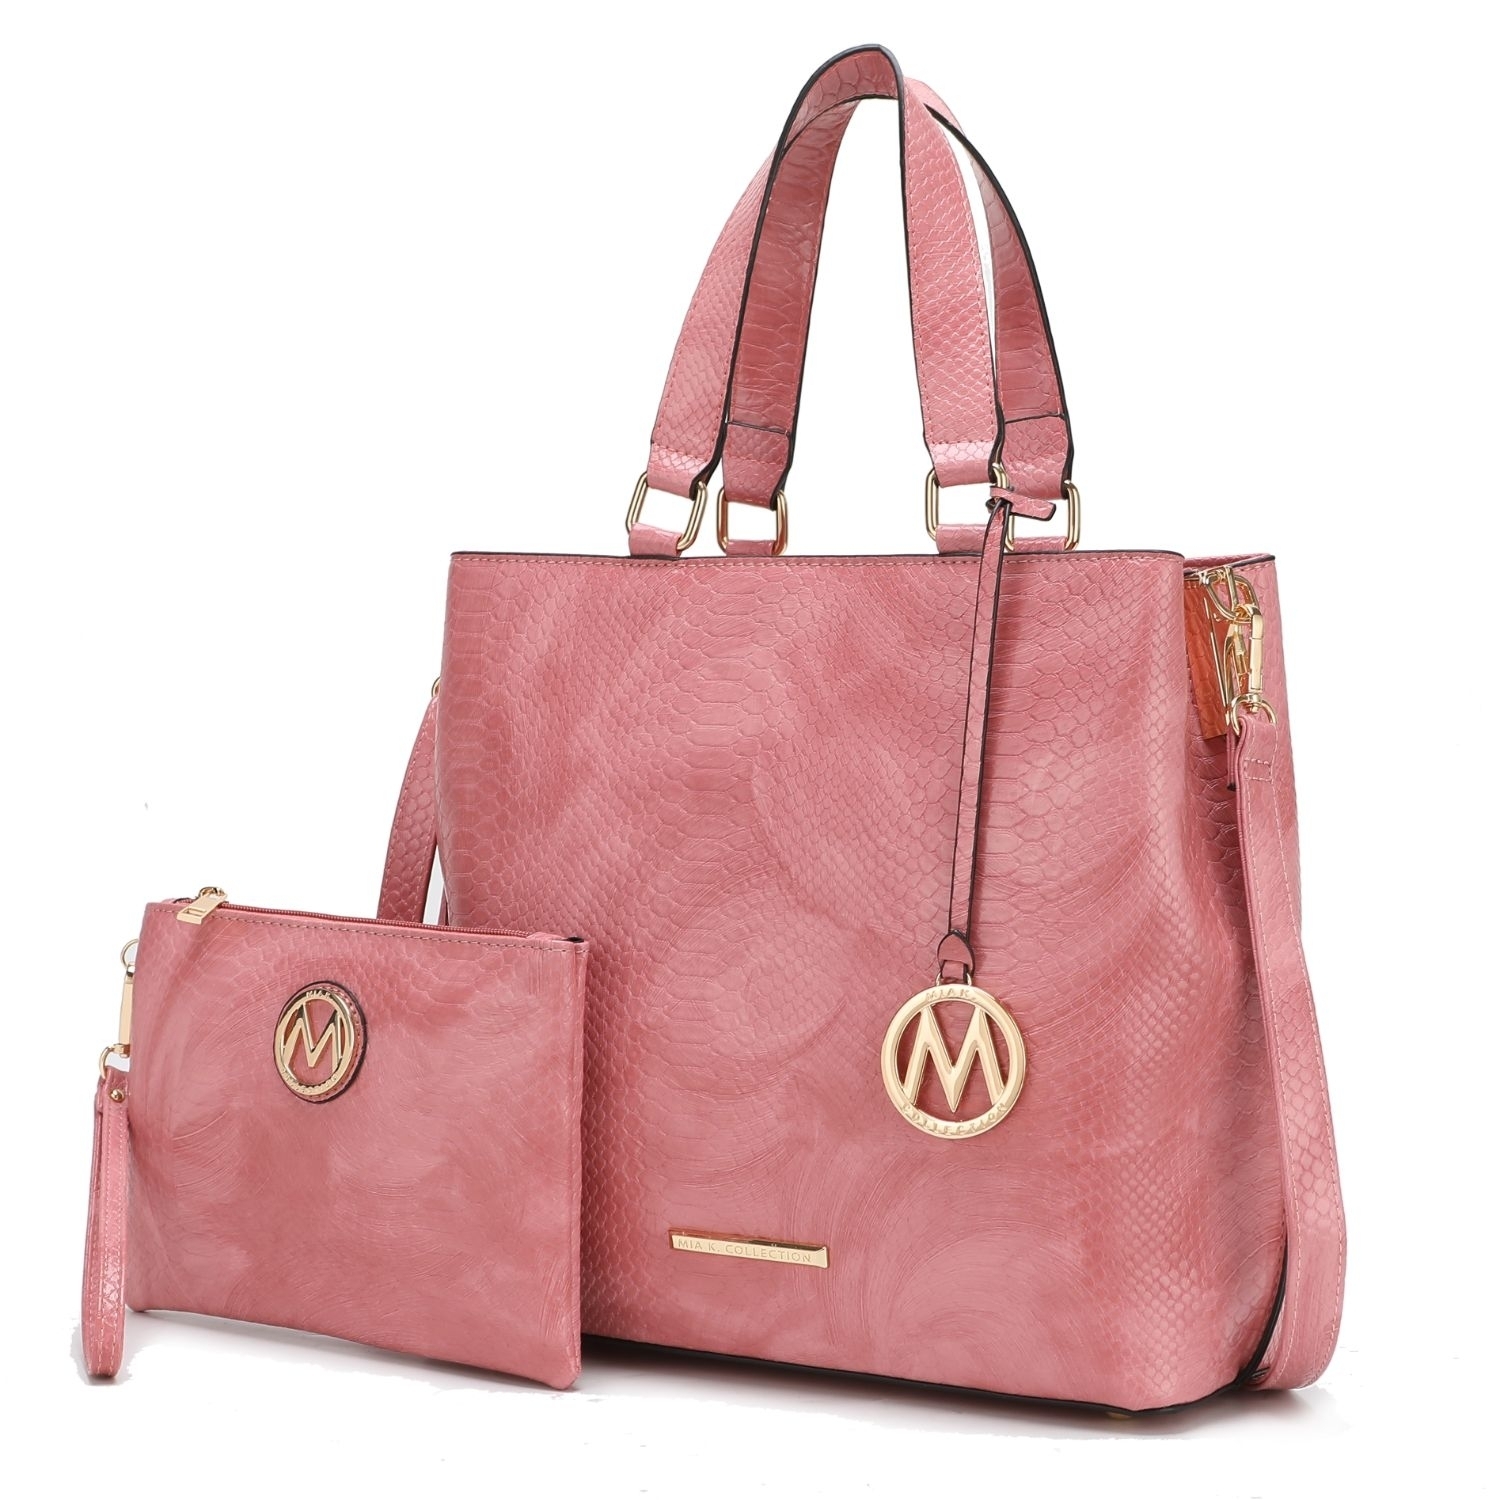 MKF Collection Beryl Snake-embossed Vegan Leather Women's Tote Bag With Wristlet - 2 Pieces, By Mia K - Mauve